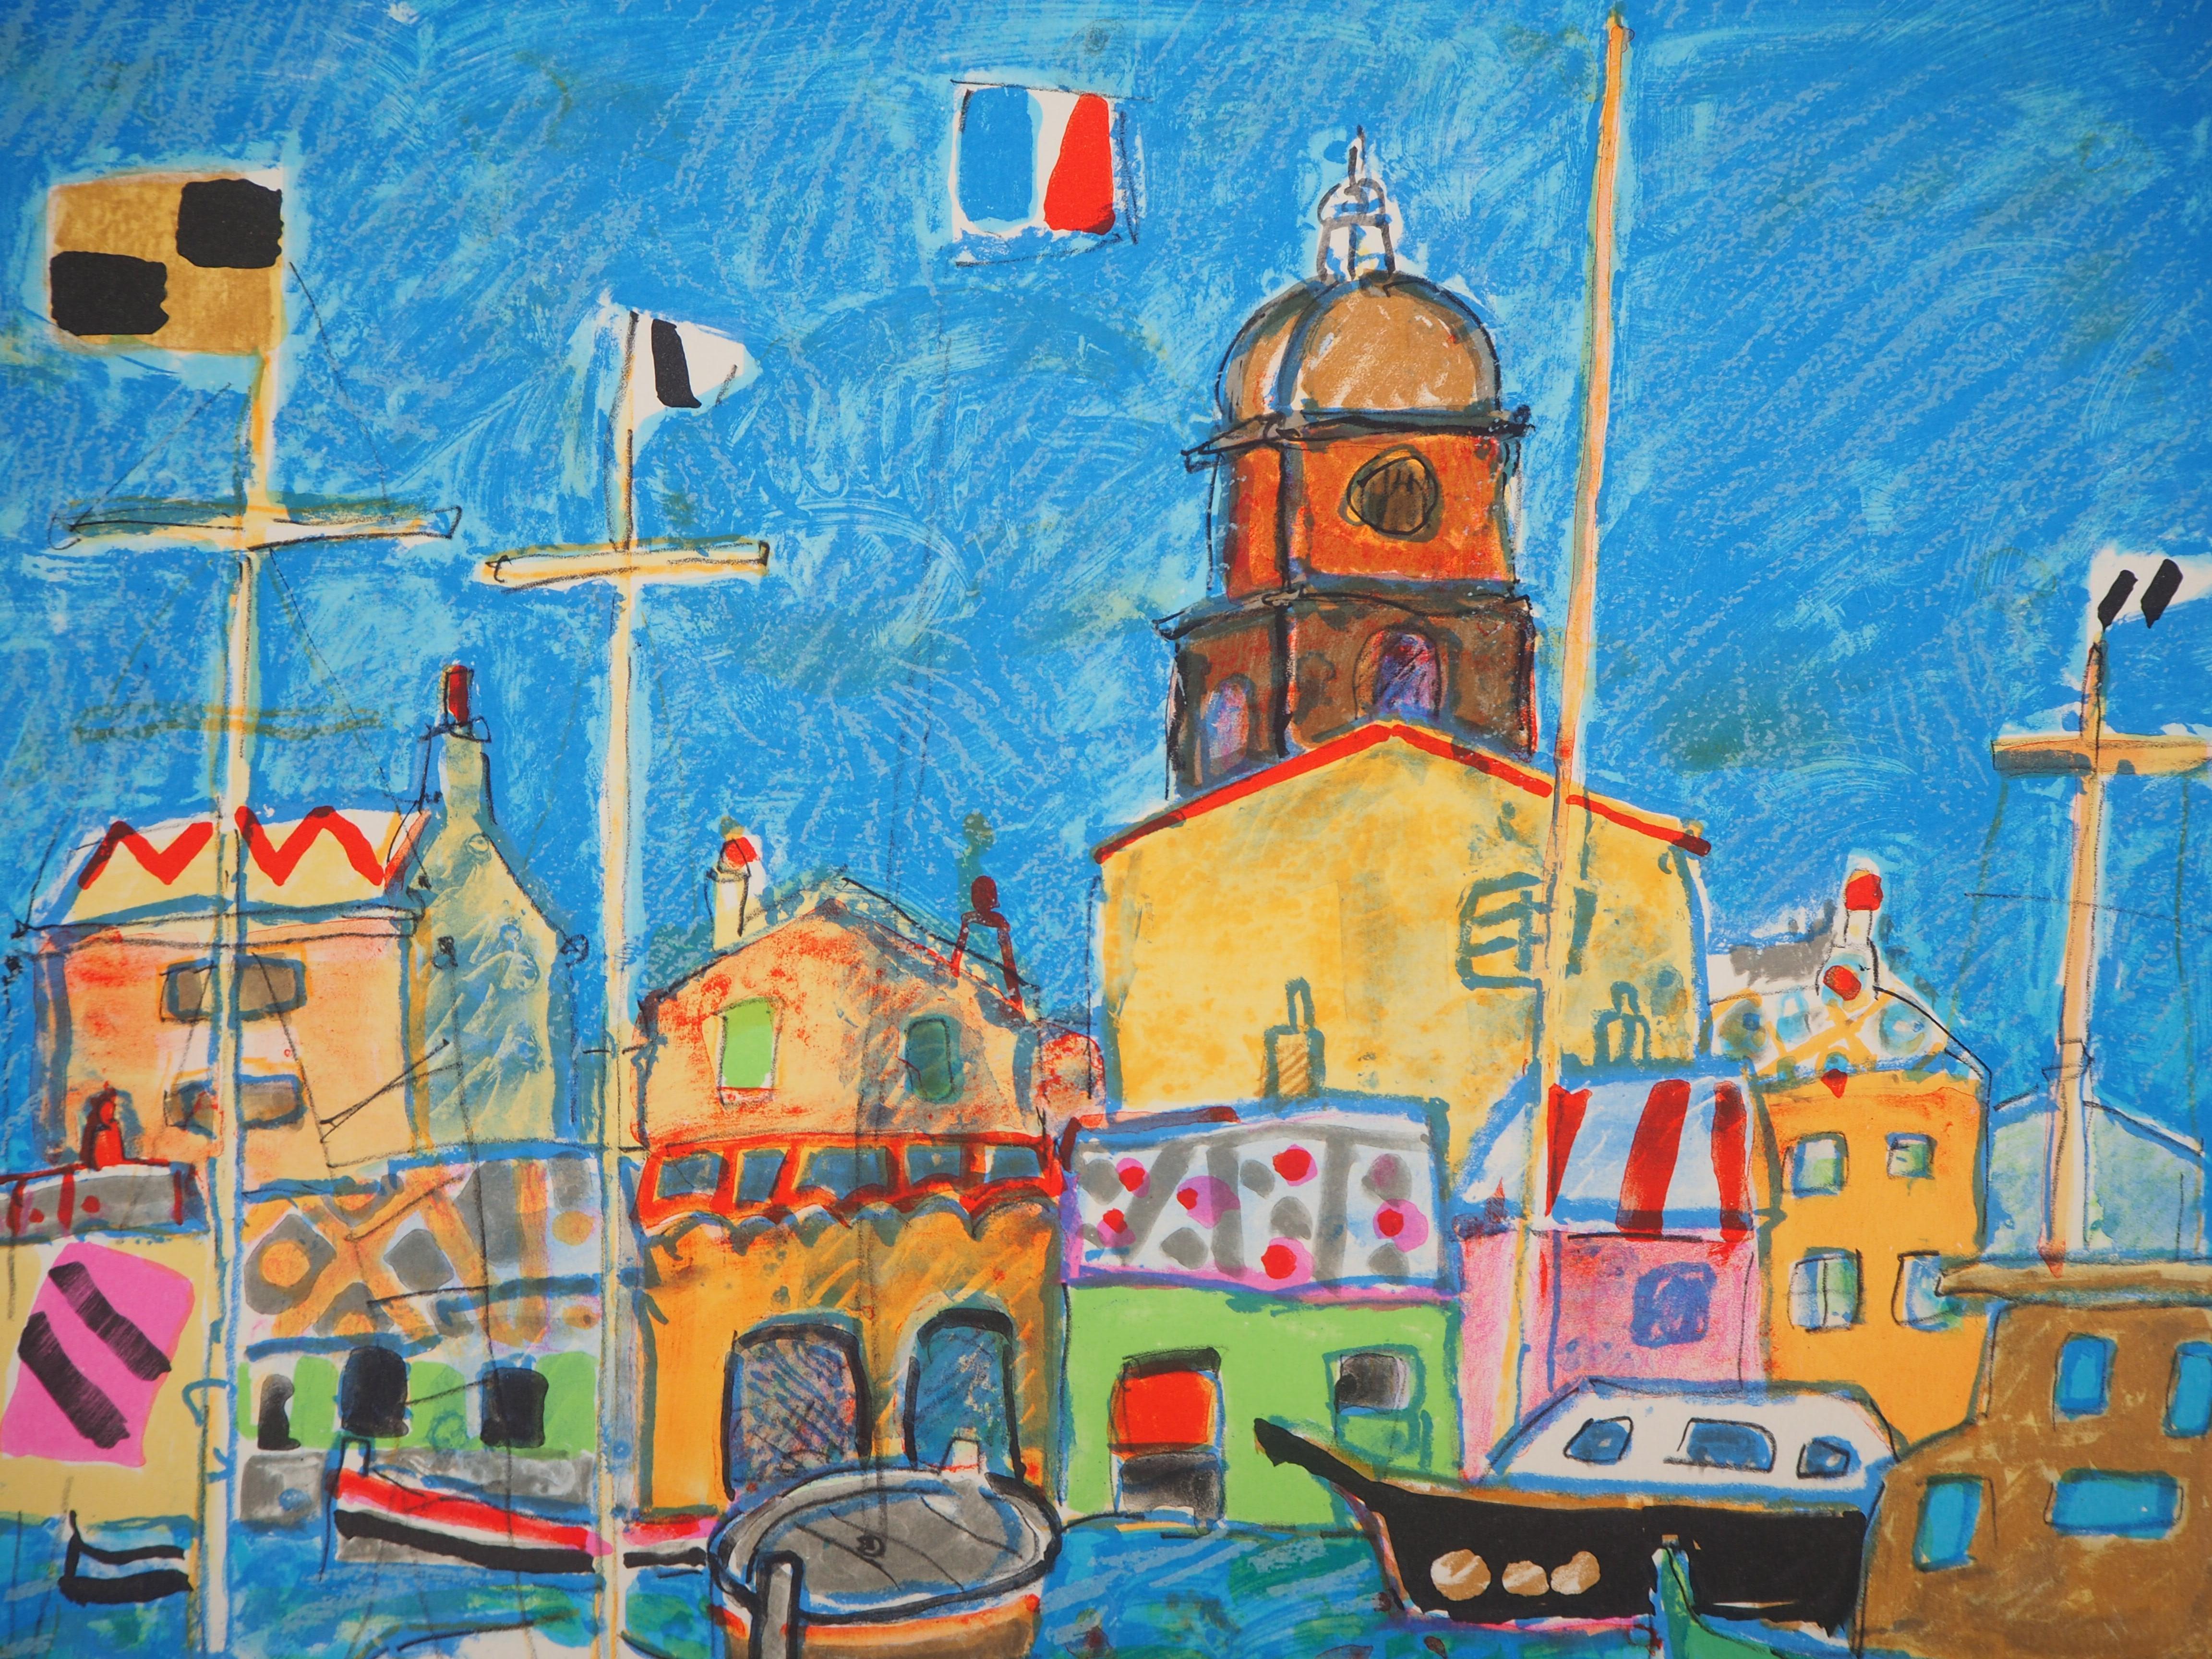 Paul AIZPIRI
Saint Tropez : The Small Harbor

Original lithograph
Printed signature in the plate
On Arches vellum 43 x 56 cm (c. 17 x 22 inch)  

Very good condition, small defects in the margins